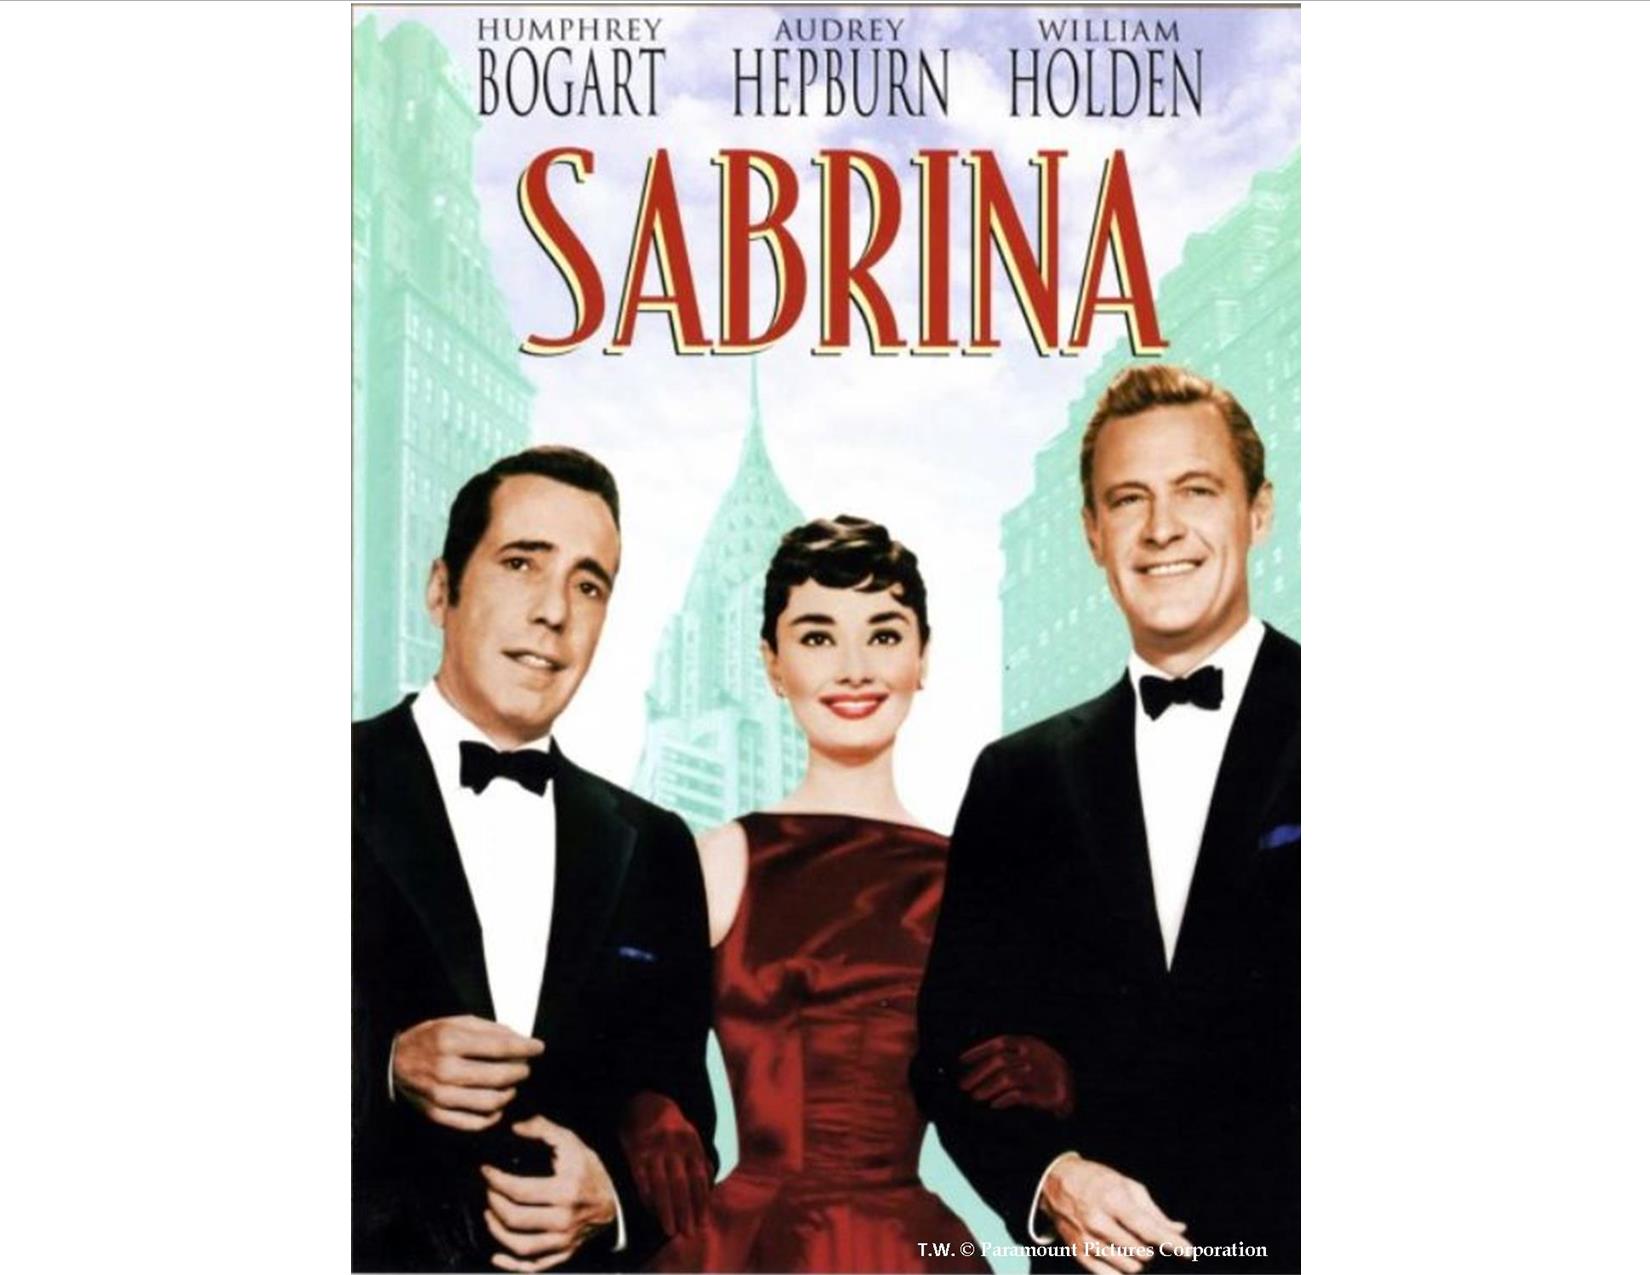 Sabrina movie poster: two fellows in tux and one female in a red dress